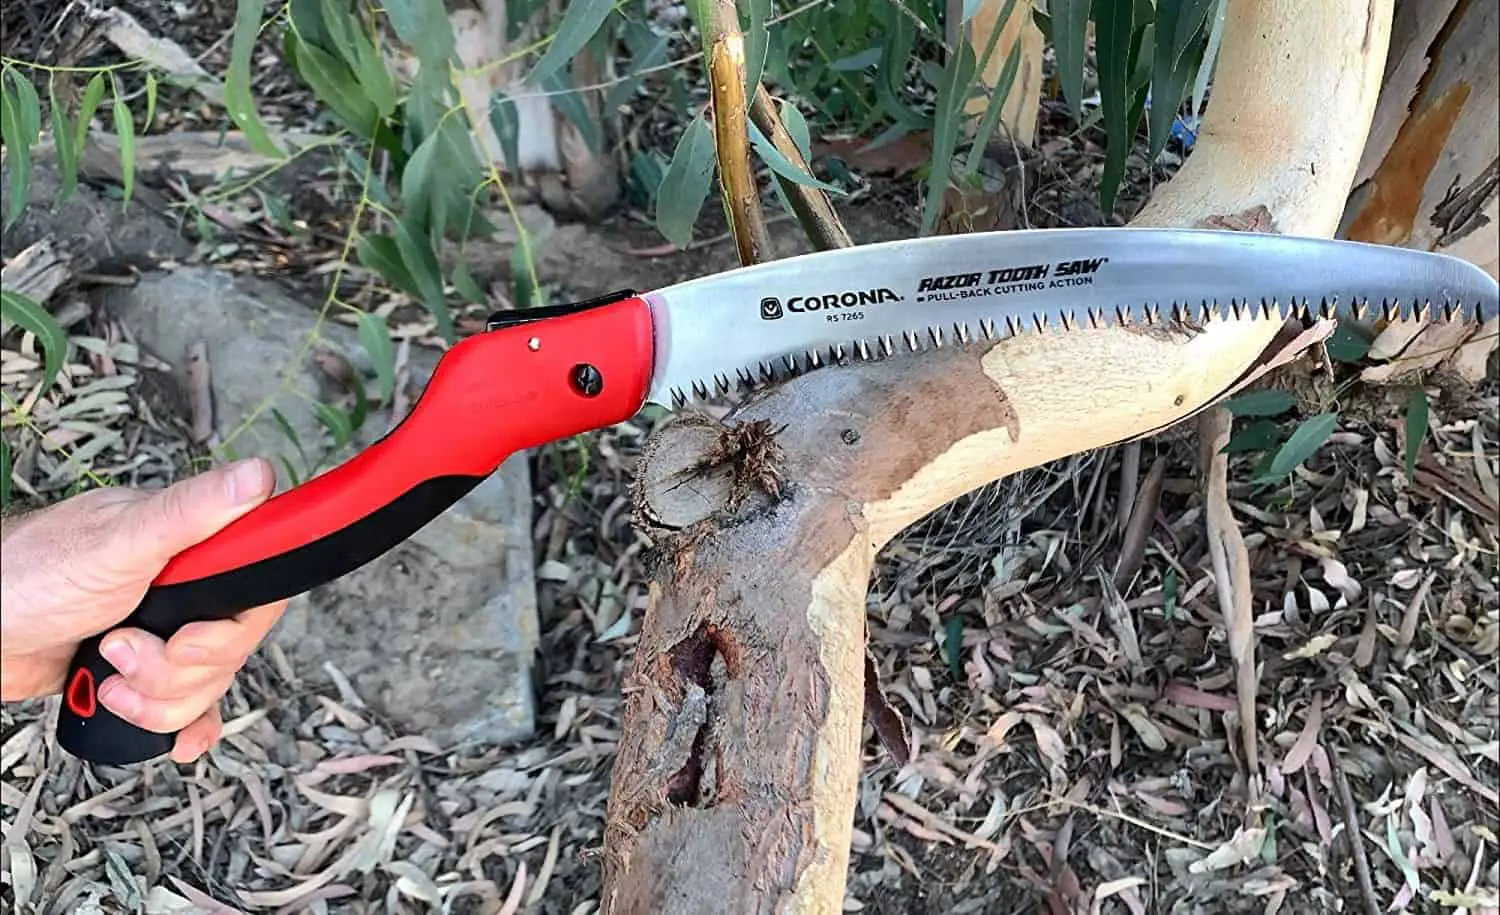 Best overall handheld, curved pruning saw for performance and price- Corona Tools 10-Inch RazorTOOTH in the garden